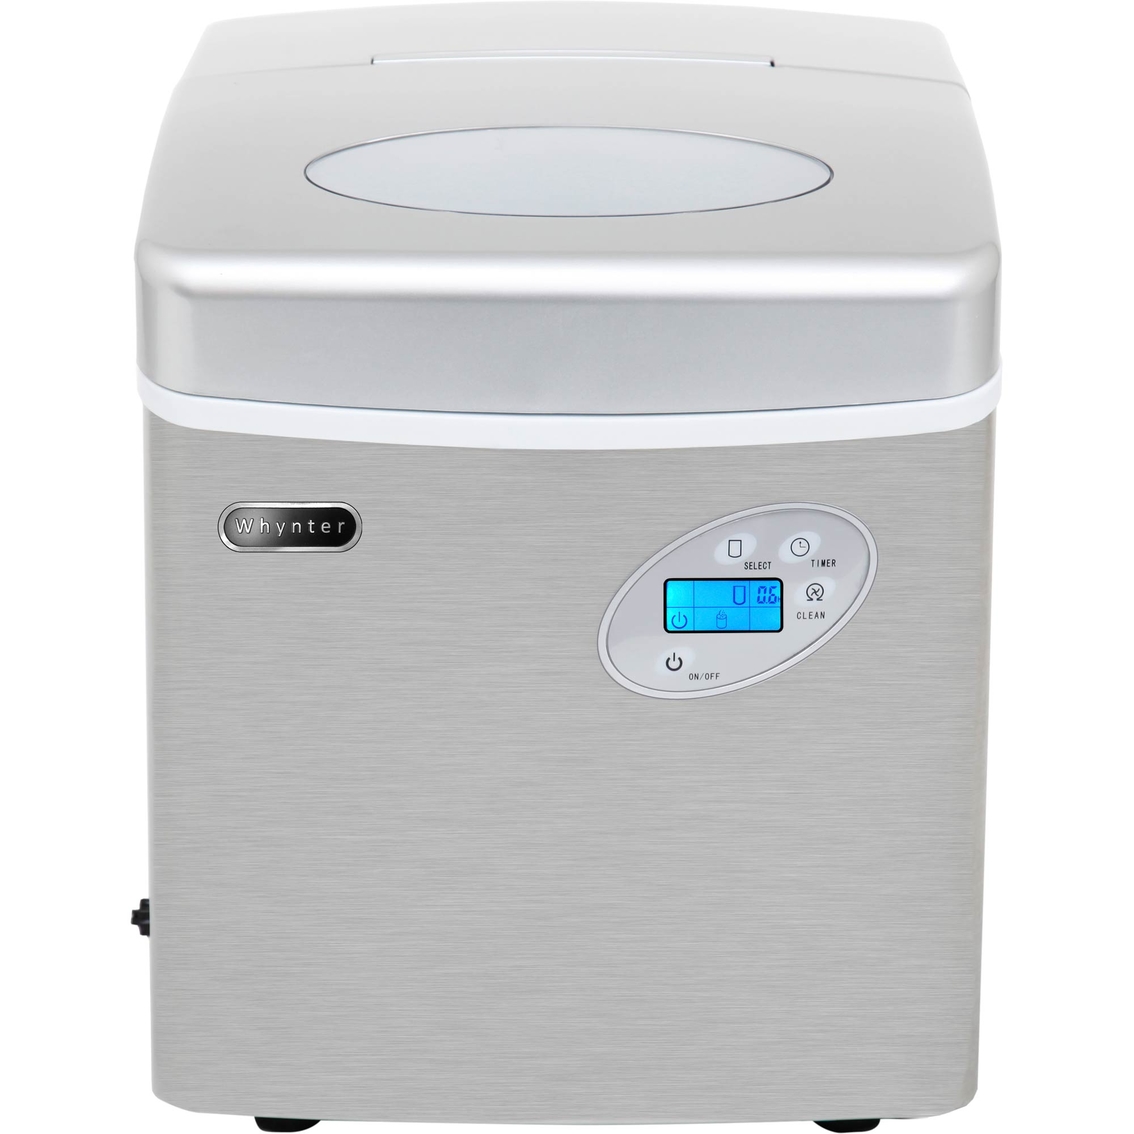 Whynter Portable Ice Maker with 49 lb. Capacity and Water Connection - Image 2 of 4